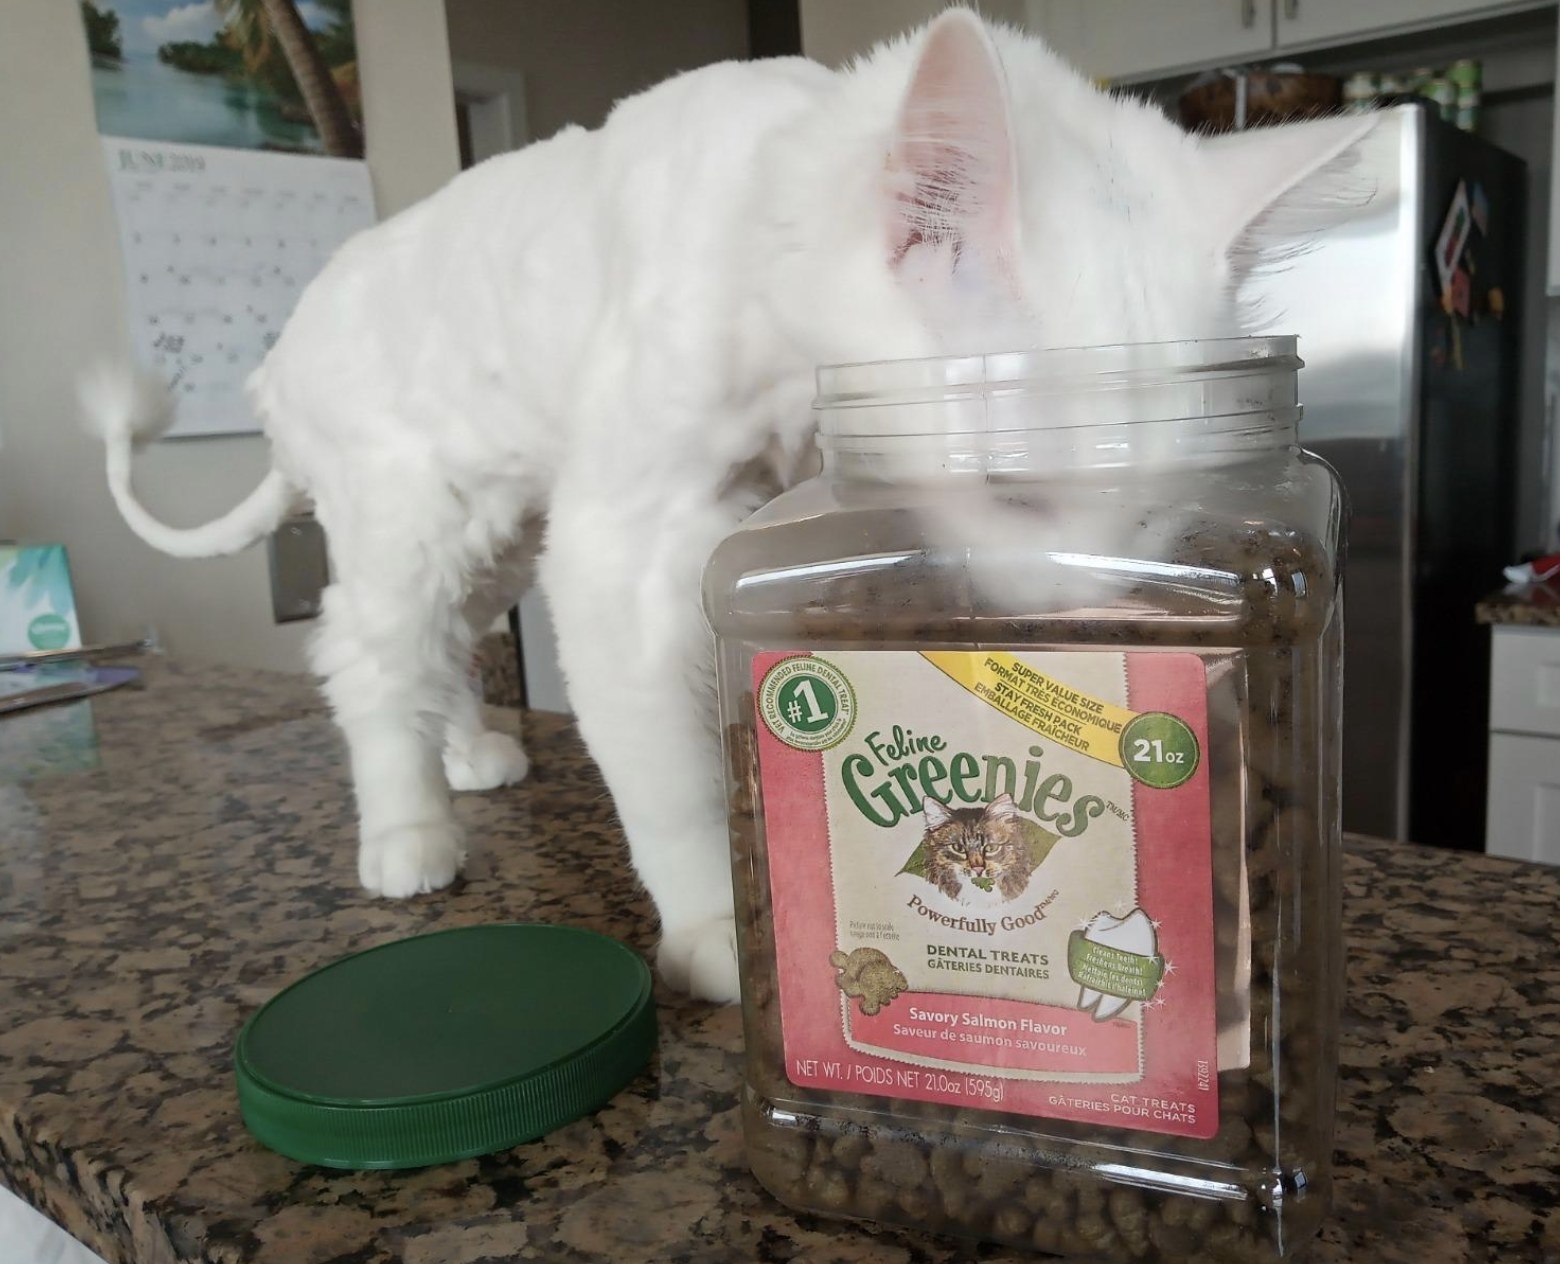 A white cat with its head inside of a greenies square package, eating treats